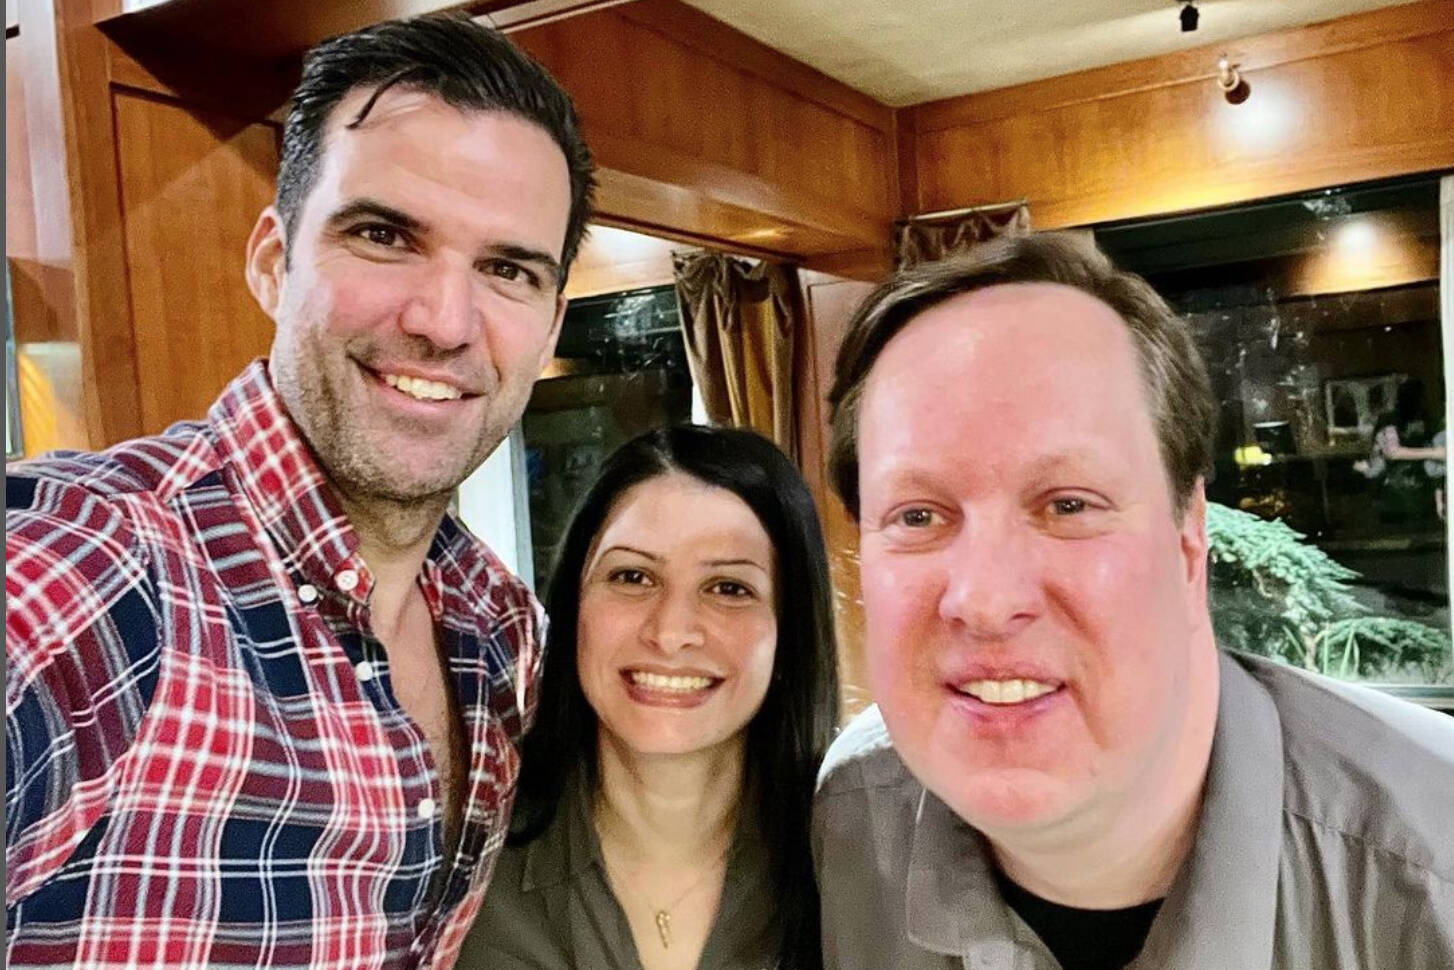 Actor Benjamin Ayres (left) poses with Allen and Karolin at Harrison Hot Springs Resort. He stayed at the resort while filming “Long Lost Christmas” in Agassiz-Harrison for the past two weeks. (Instagram/@benjaminayres)